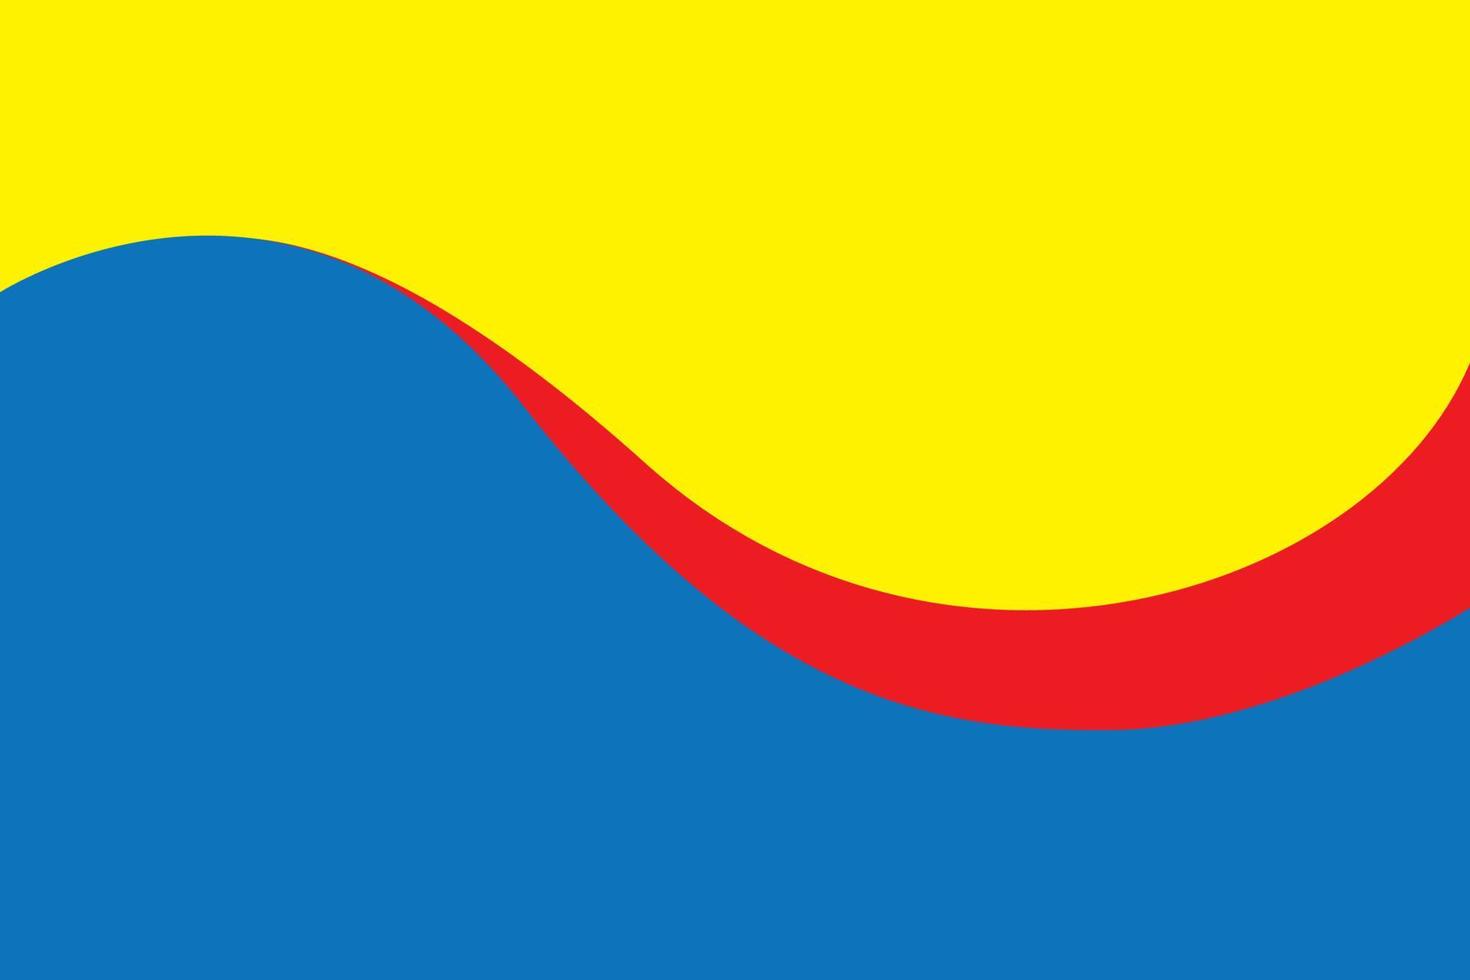 Primary colors background, blue, red, and yellow. Vector illustration.